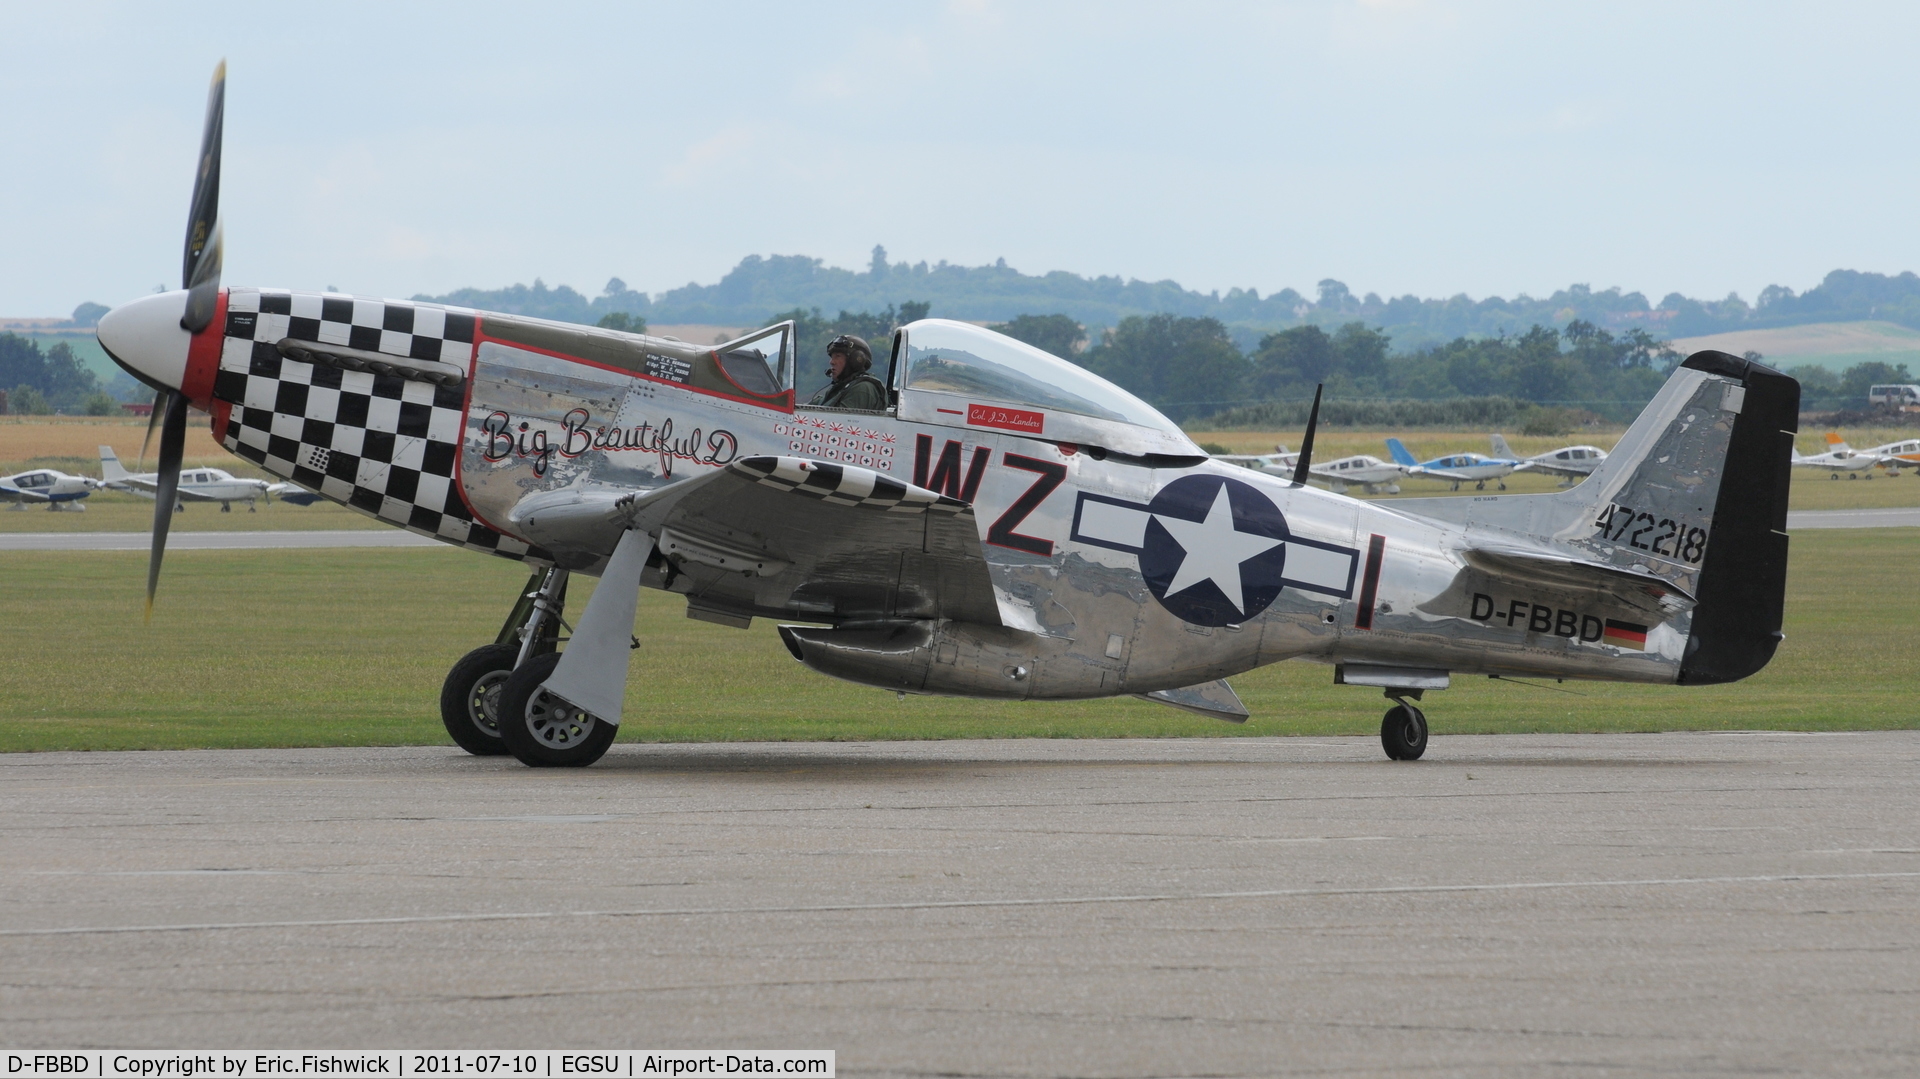 D-FBBD, 1951 Commonwealth CA-18 Mustang 22 (P-51D) C/N CACM-192-1517, 1. D-FBBD at Flying Legends Air Show (July 2011)